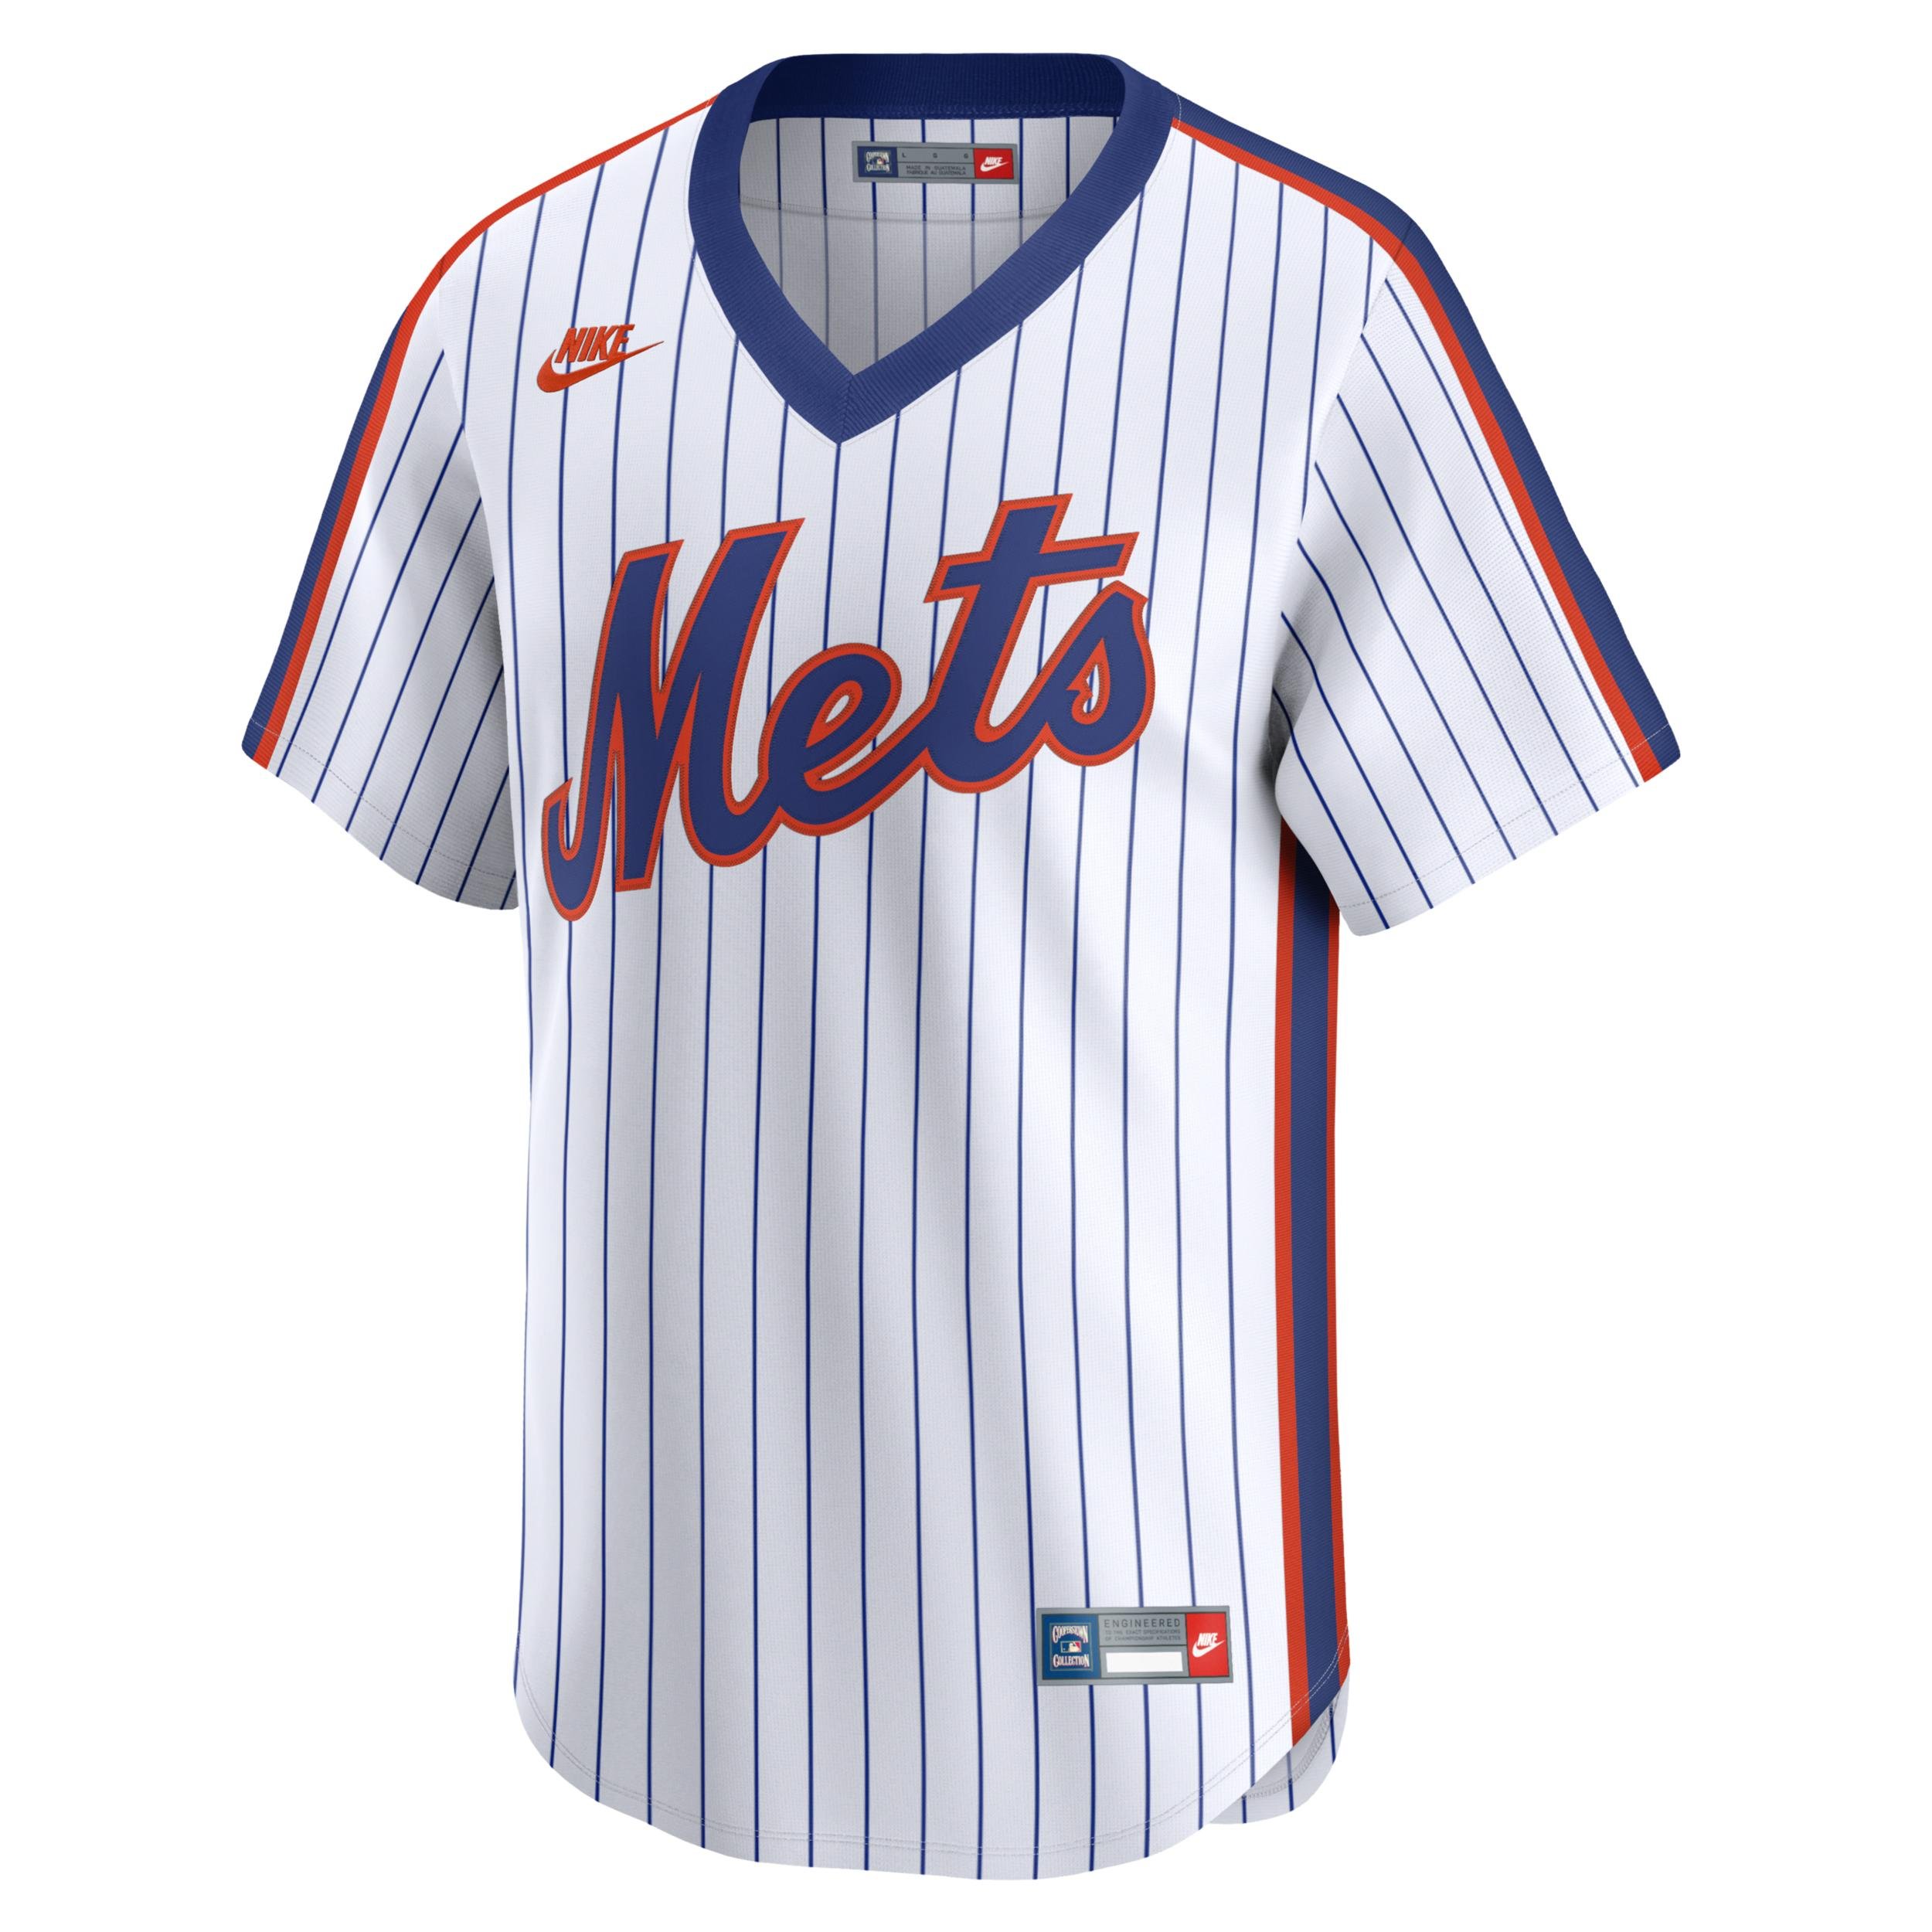 New York Mets Cooperstown Nike Men's Dri-FIT ADV MLB Limited Jersey by NIKE